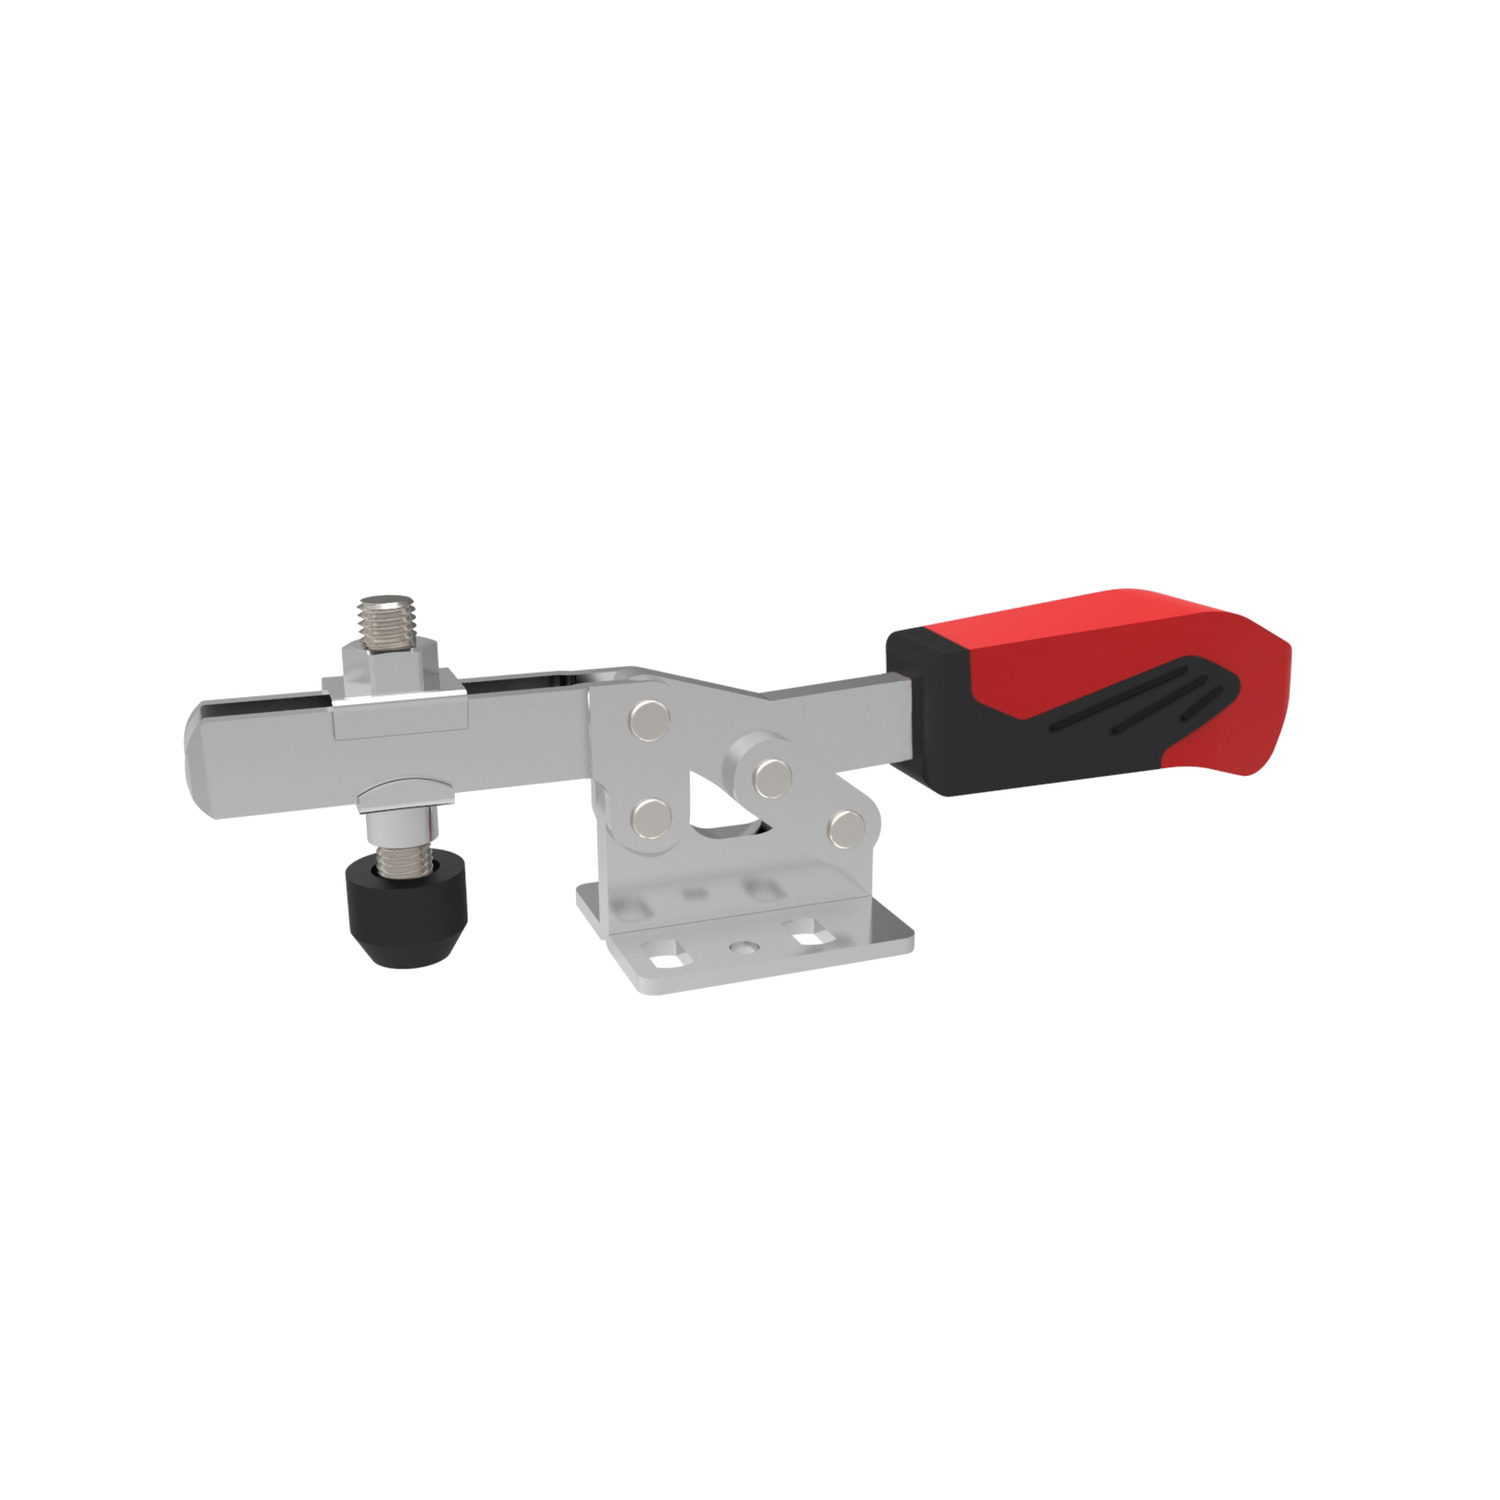 41000.1 Horizontal Acting Toggle Clamps